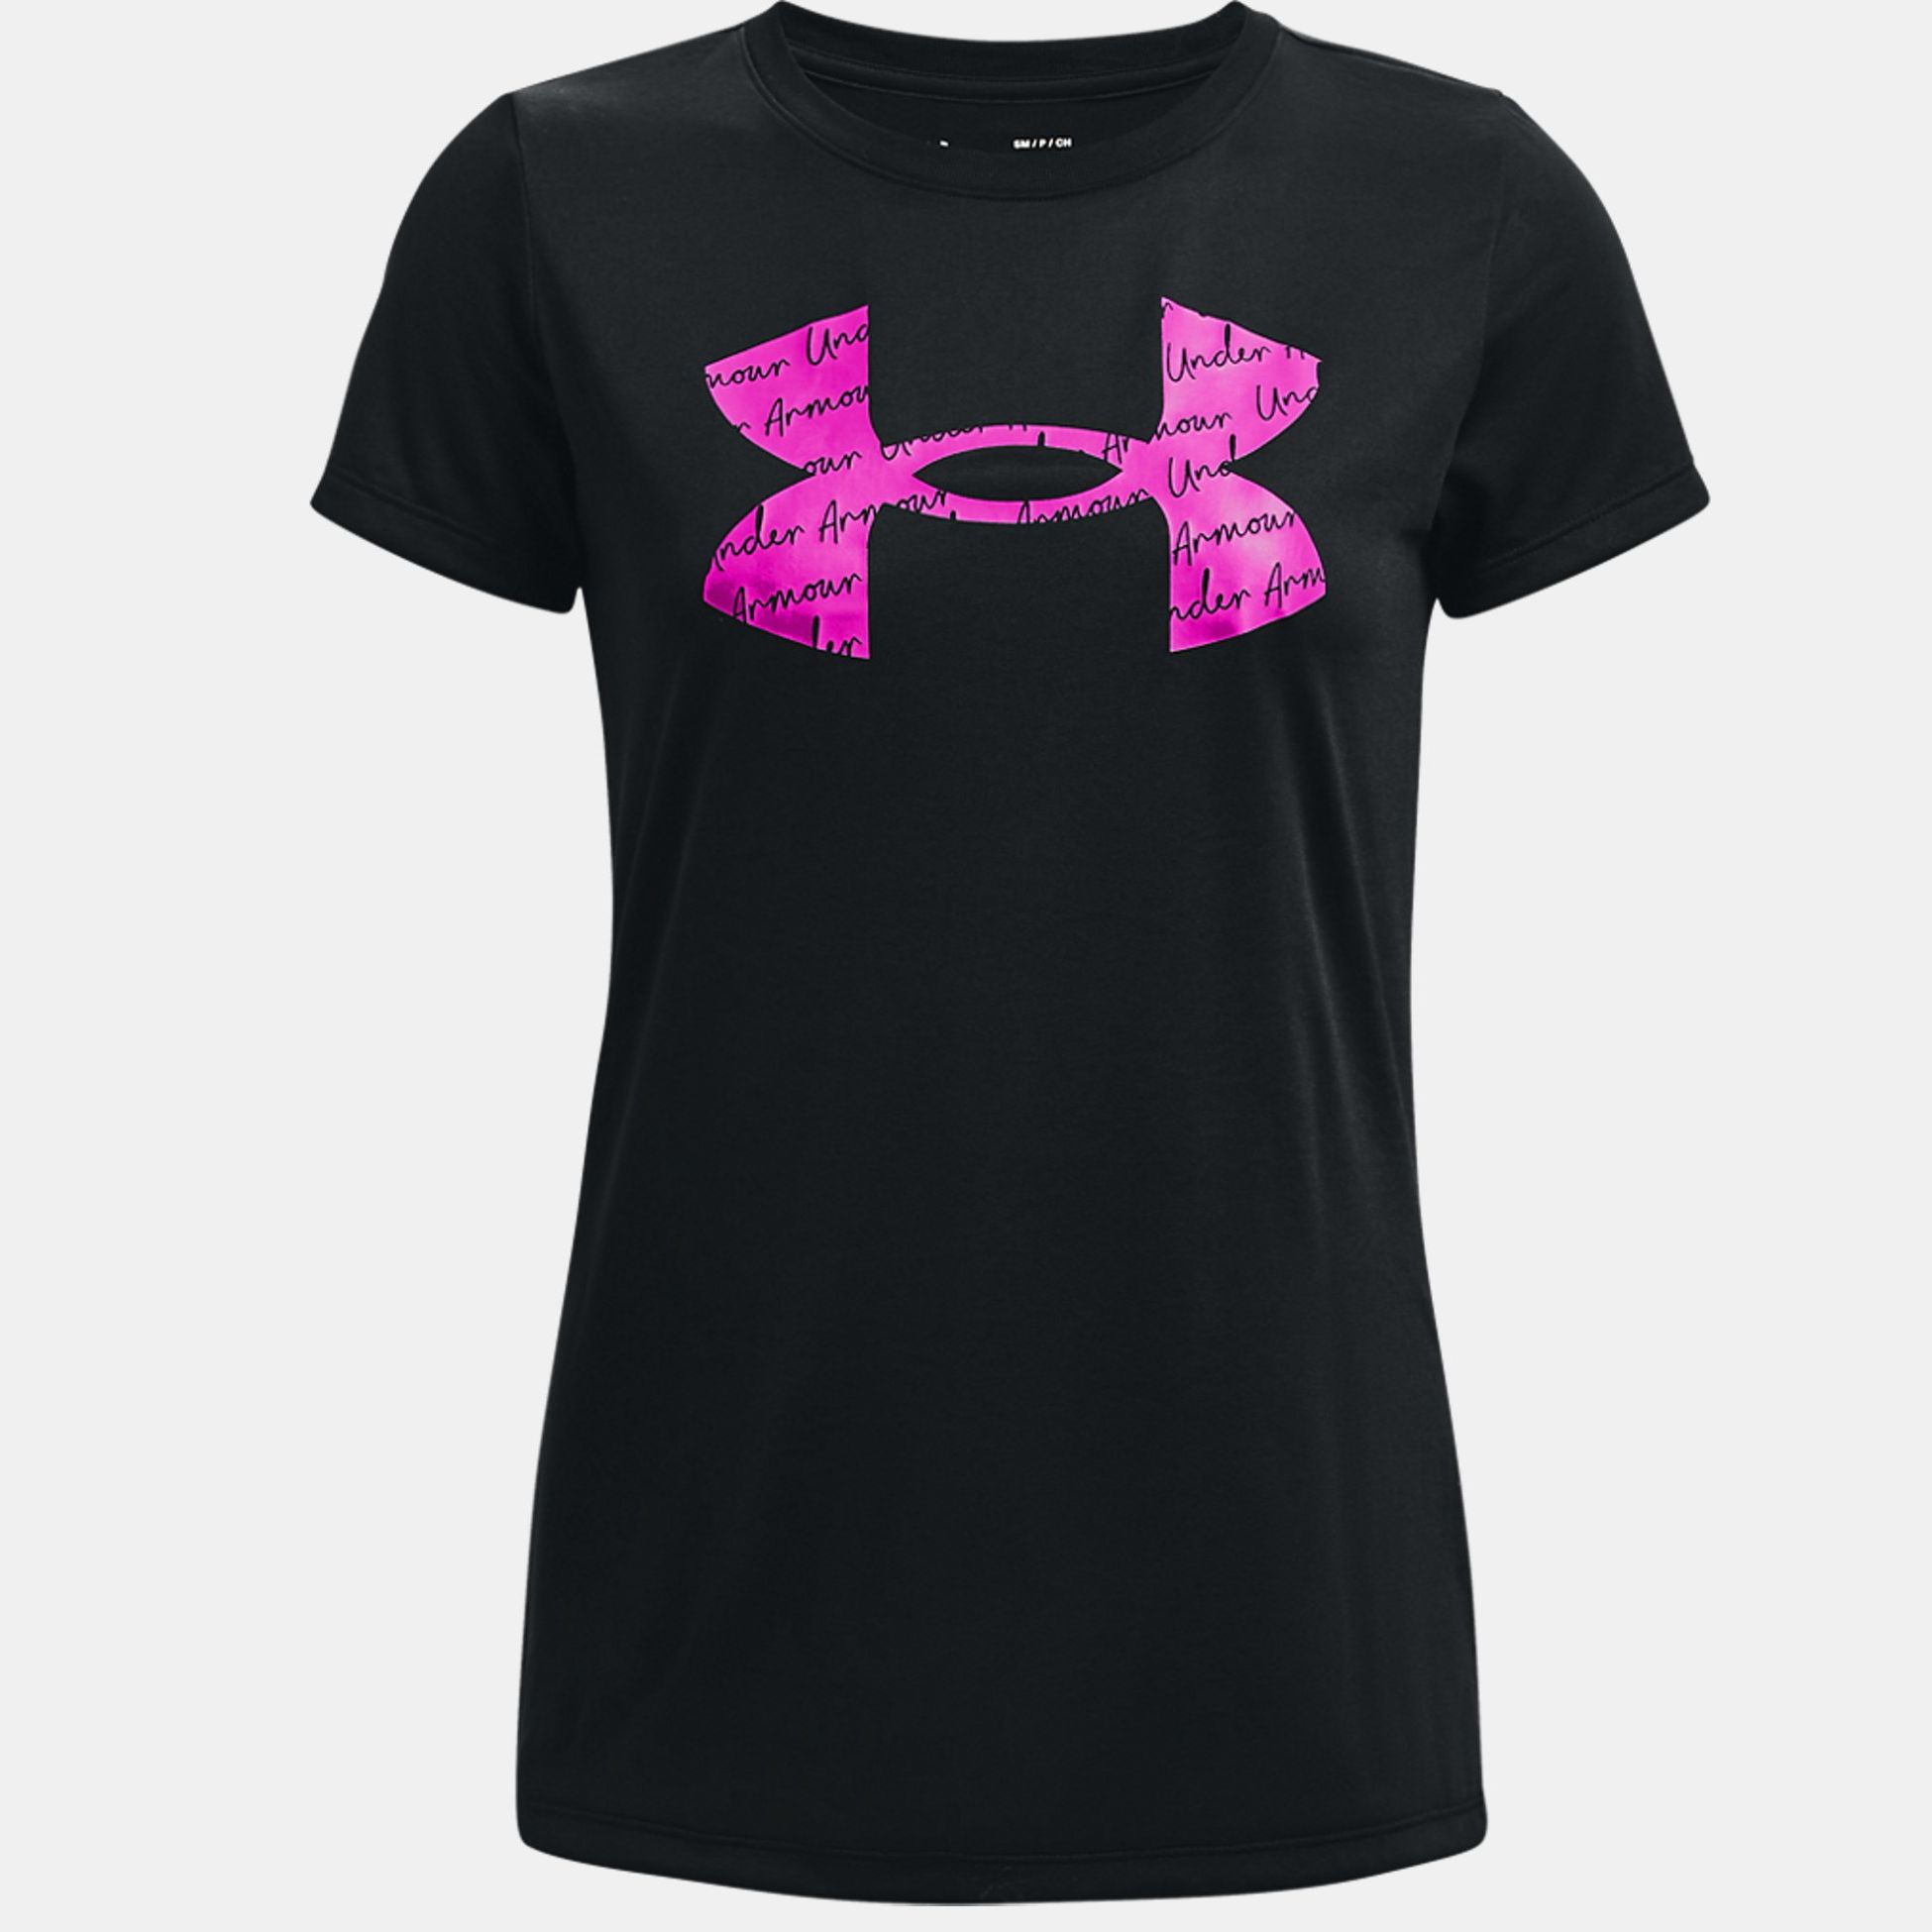 Clothing -  under armour UA Tech Graphic Short Sleeve 5143